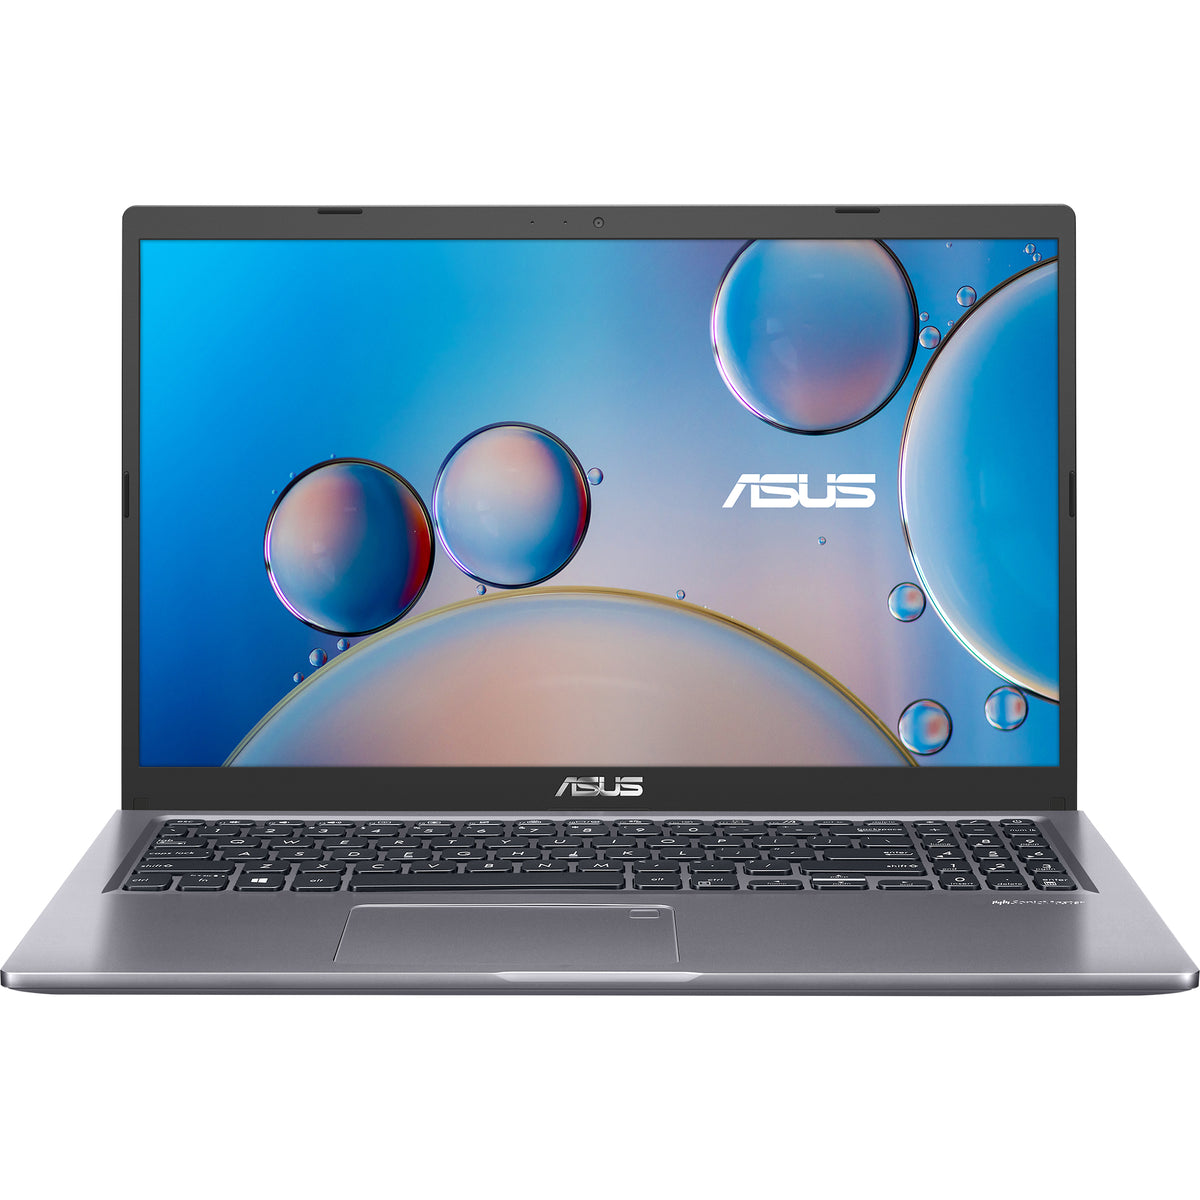 NB ASUS Laptop M515DA - R5 3500U 8GB 256GB SSD 15.6P FHD Radeon Vega 8 Graphics S/OS 3Yr - Silver